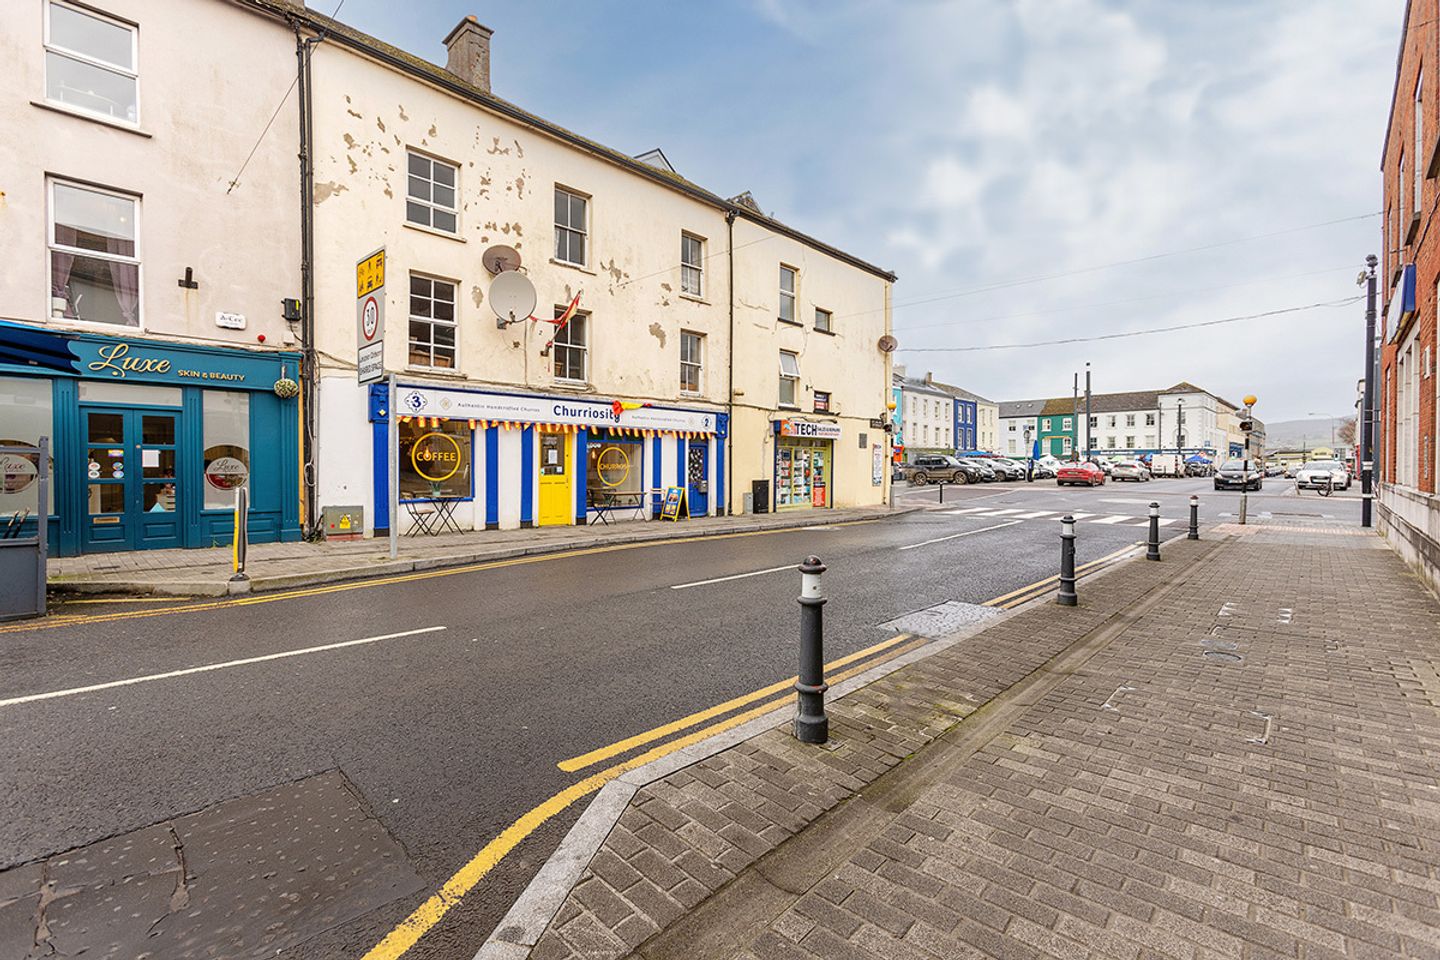 2-3 Mary Street, Dungarvan, Co. Waterford, X35YP92